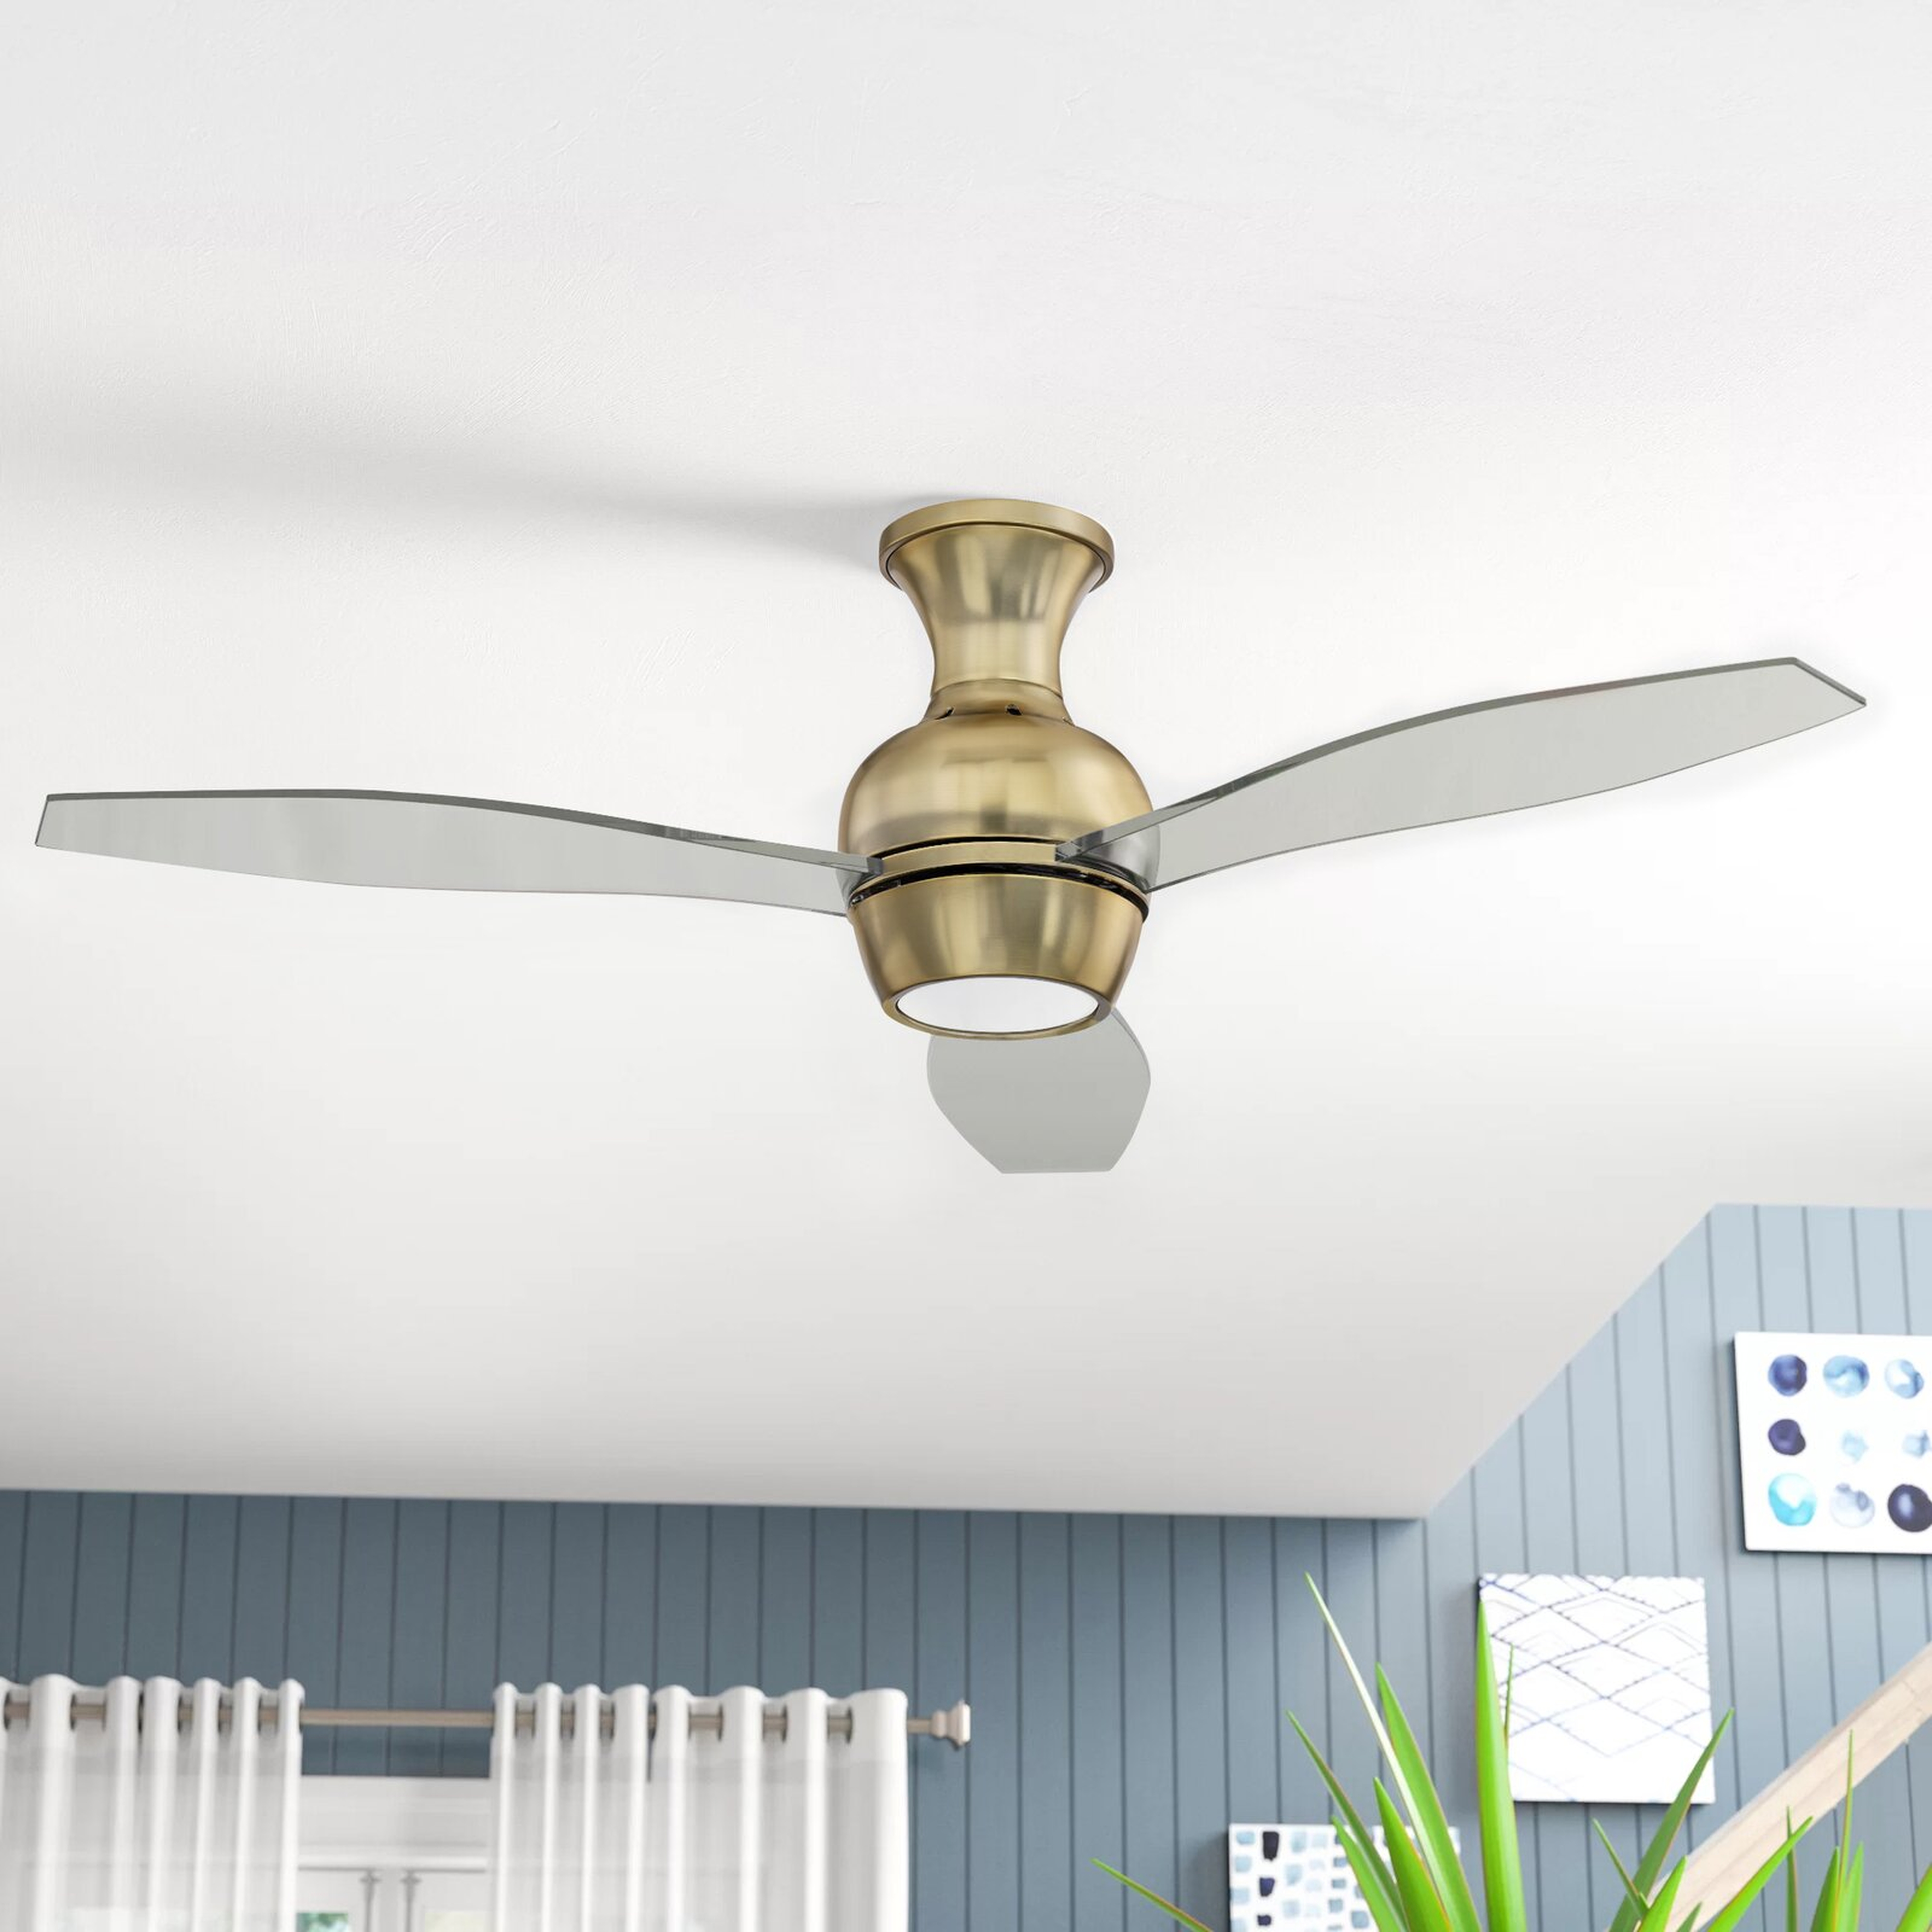 52" Mcnemar 3 - Blade LED Propeller Ceiling Fan with Wall Control and Light Kit Included - Wayfair